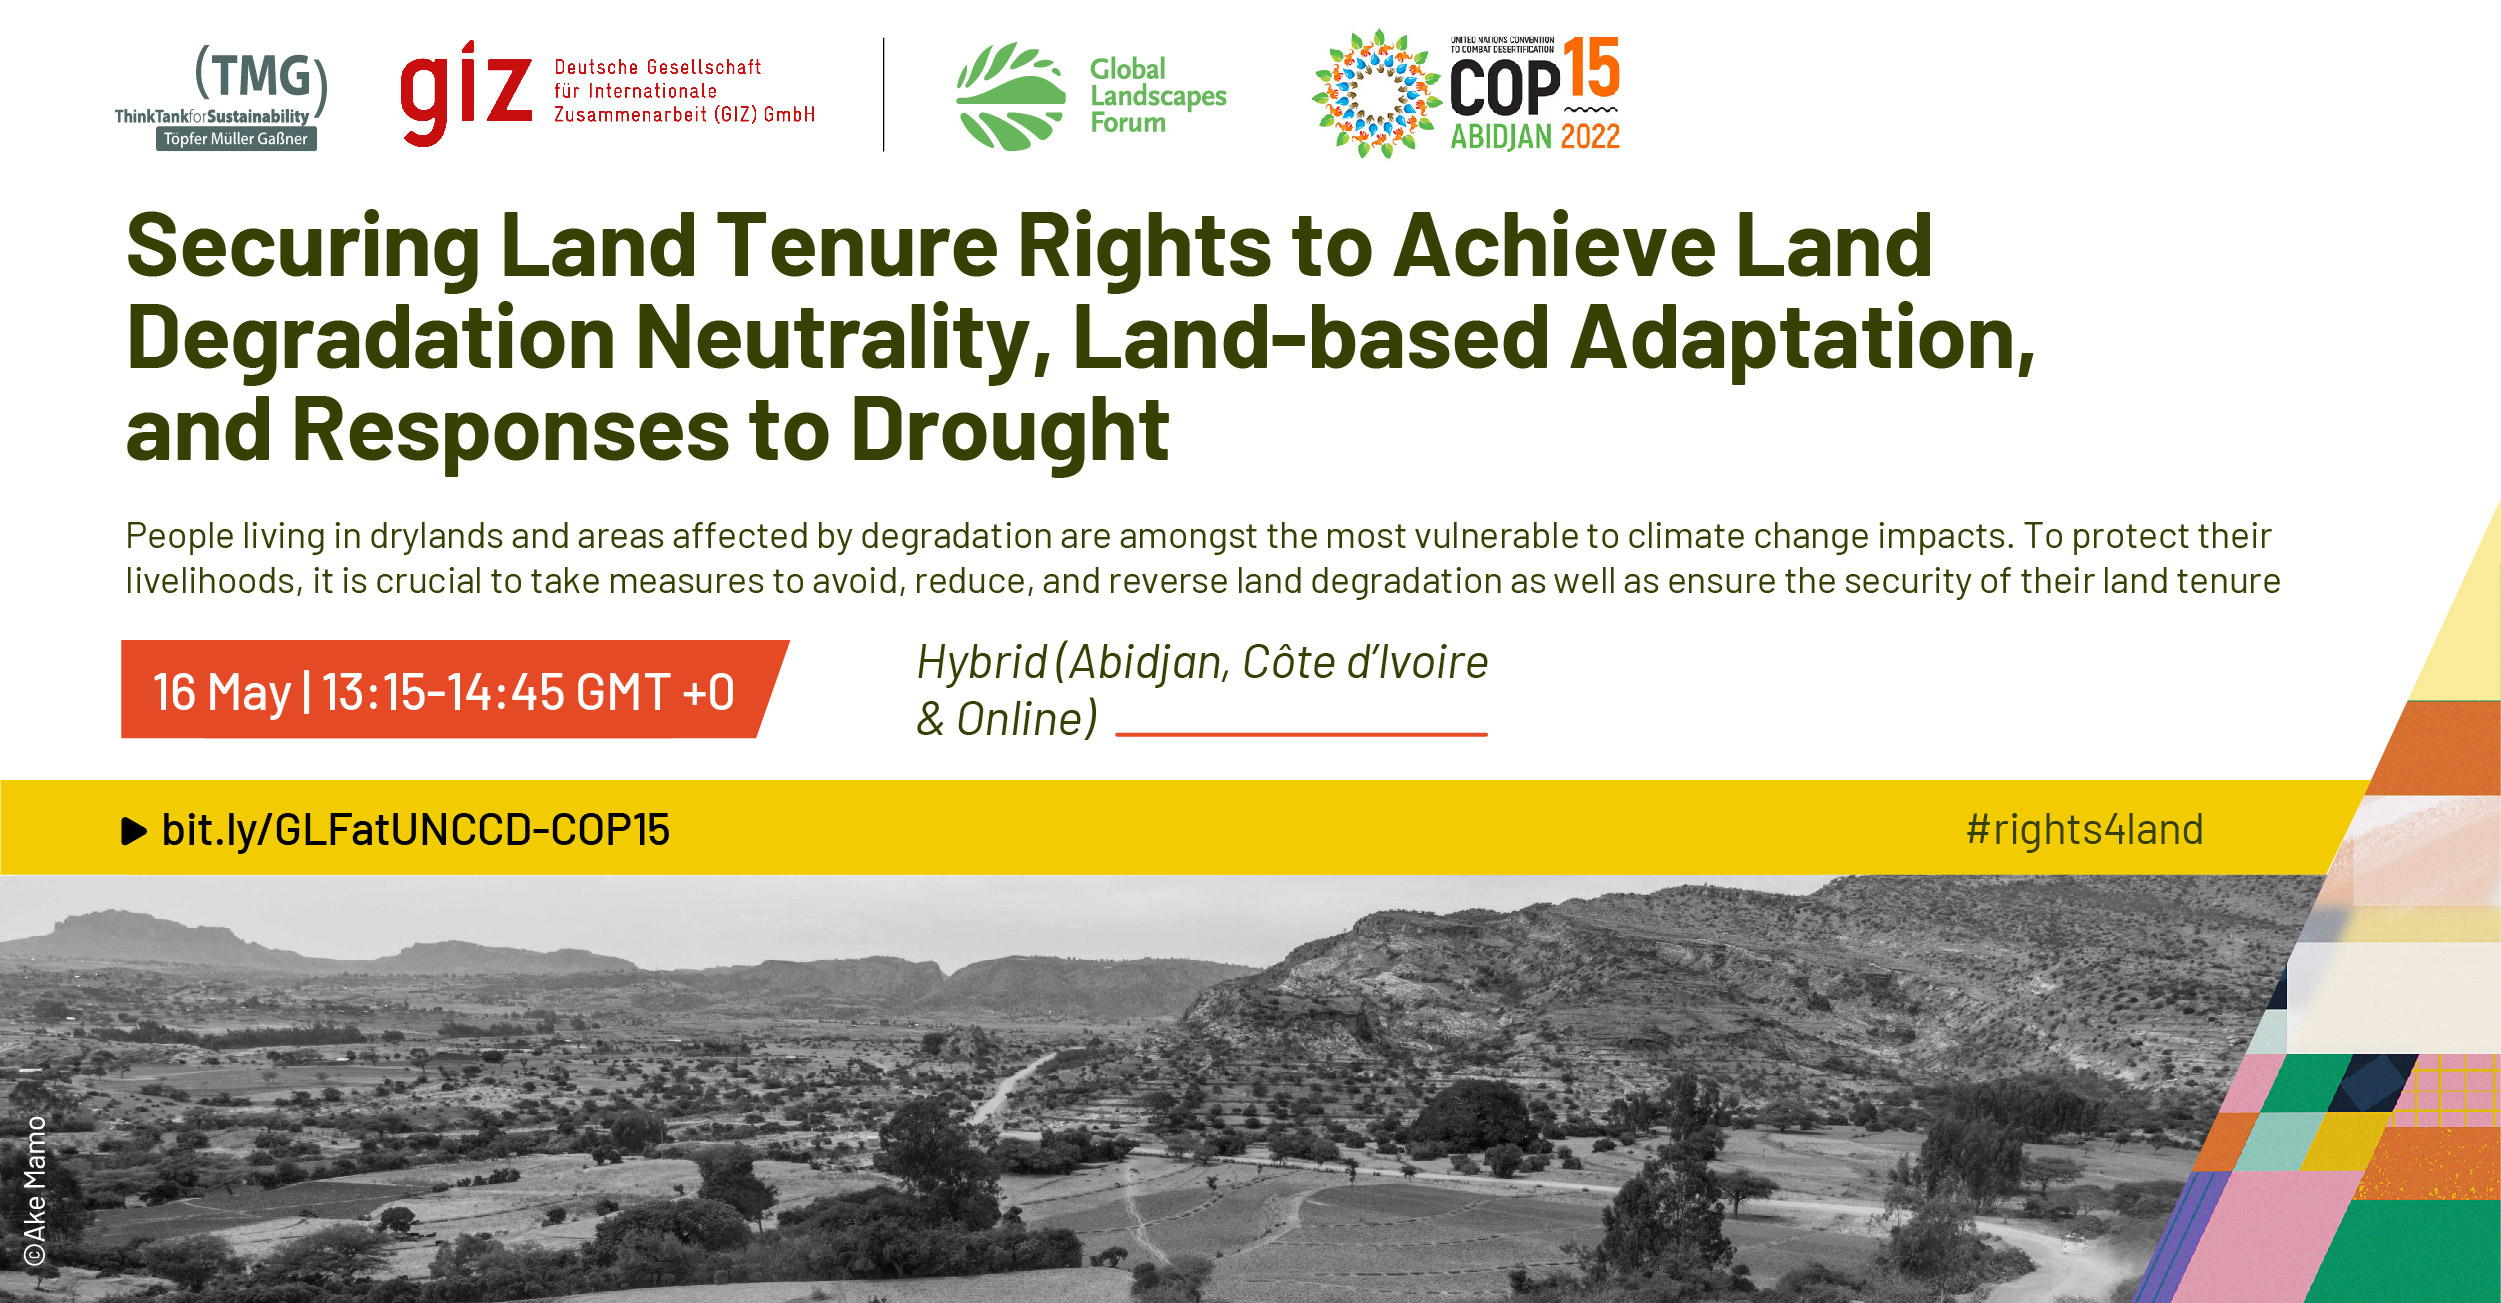 Securing Land Tenure Rights to Achieve Land Degradation Neutrality, Land-based Adaptation, and Responses to Drought